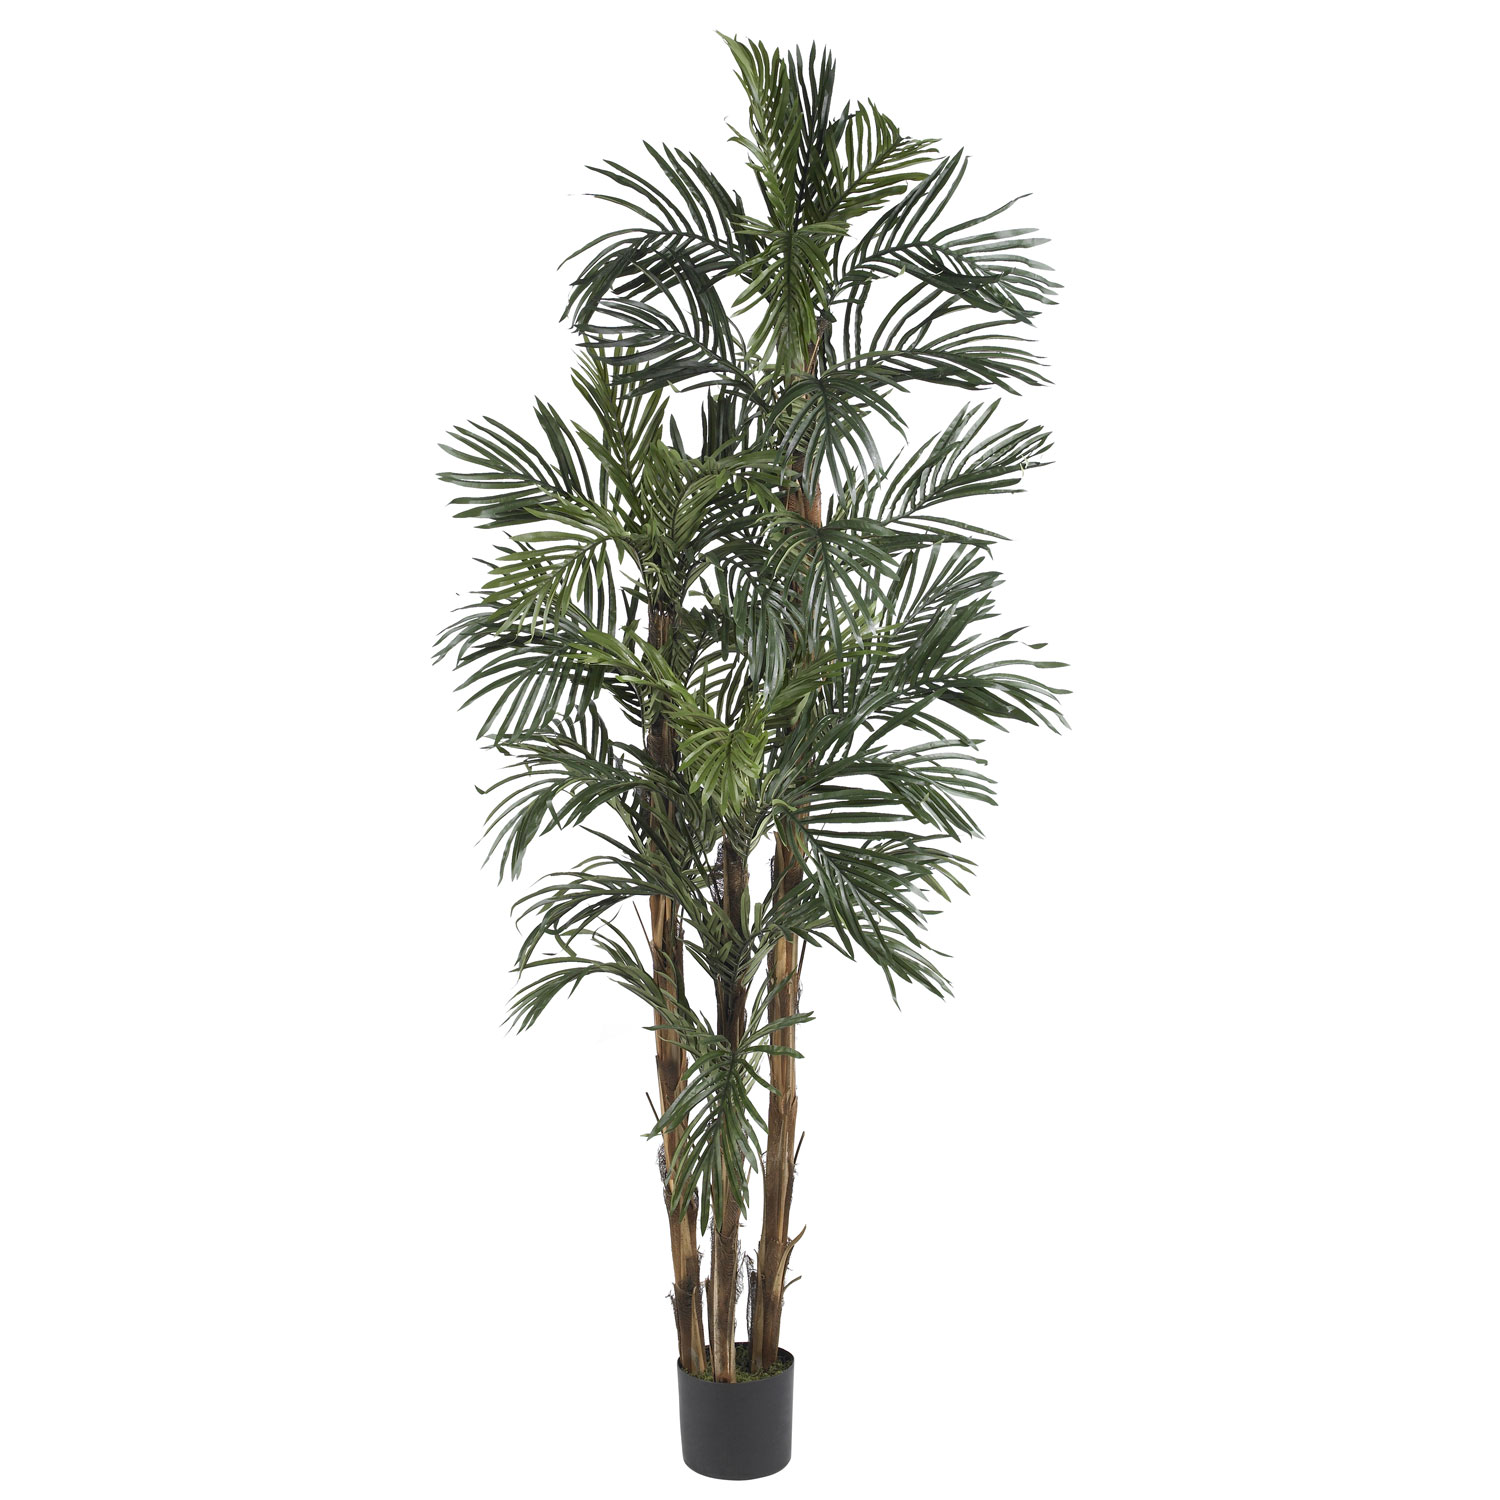 6 Foot Robellini Palm Tree: Potted